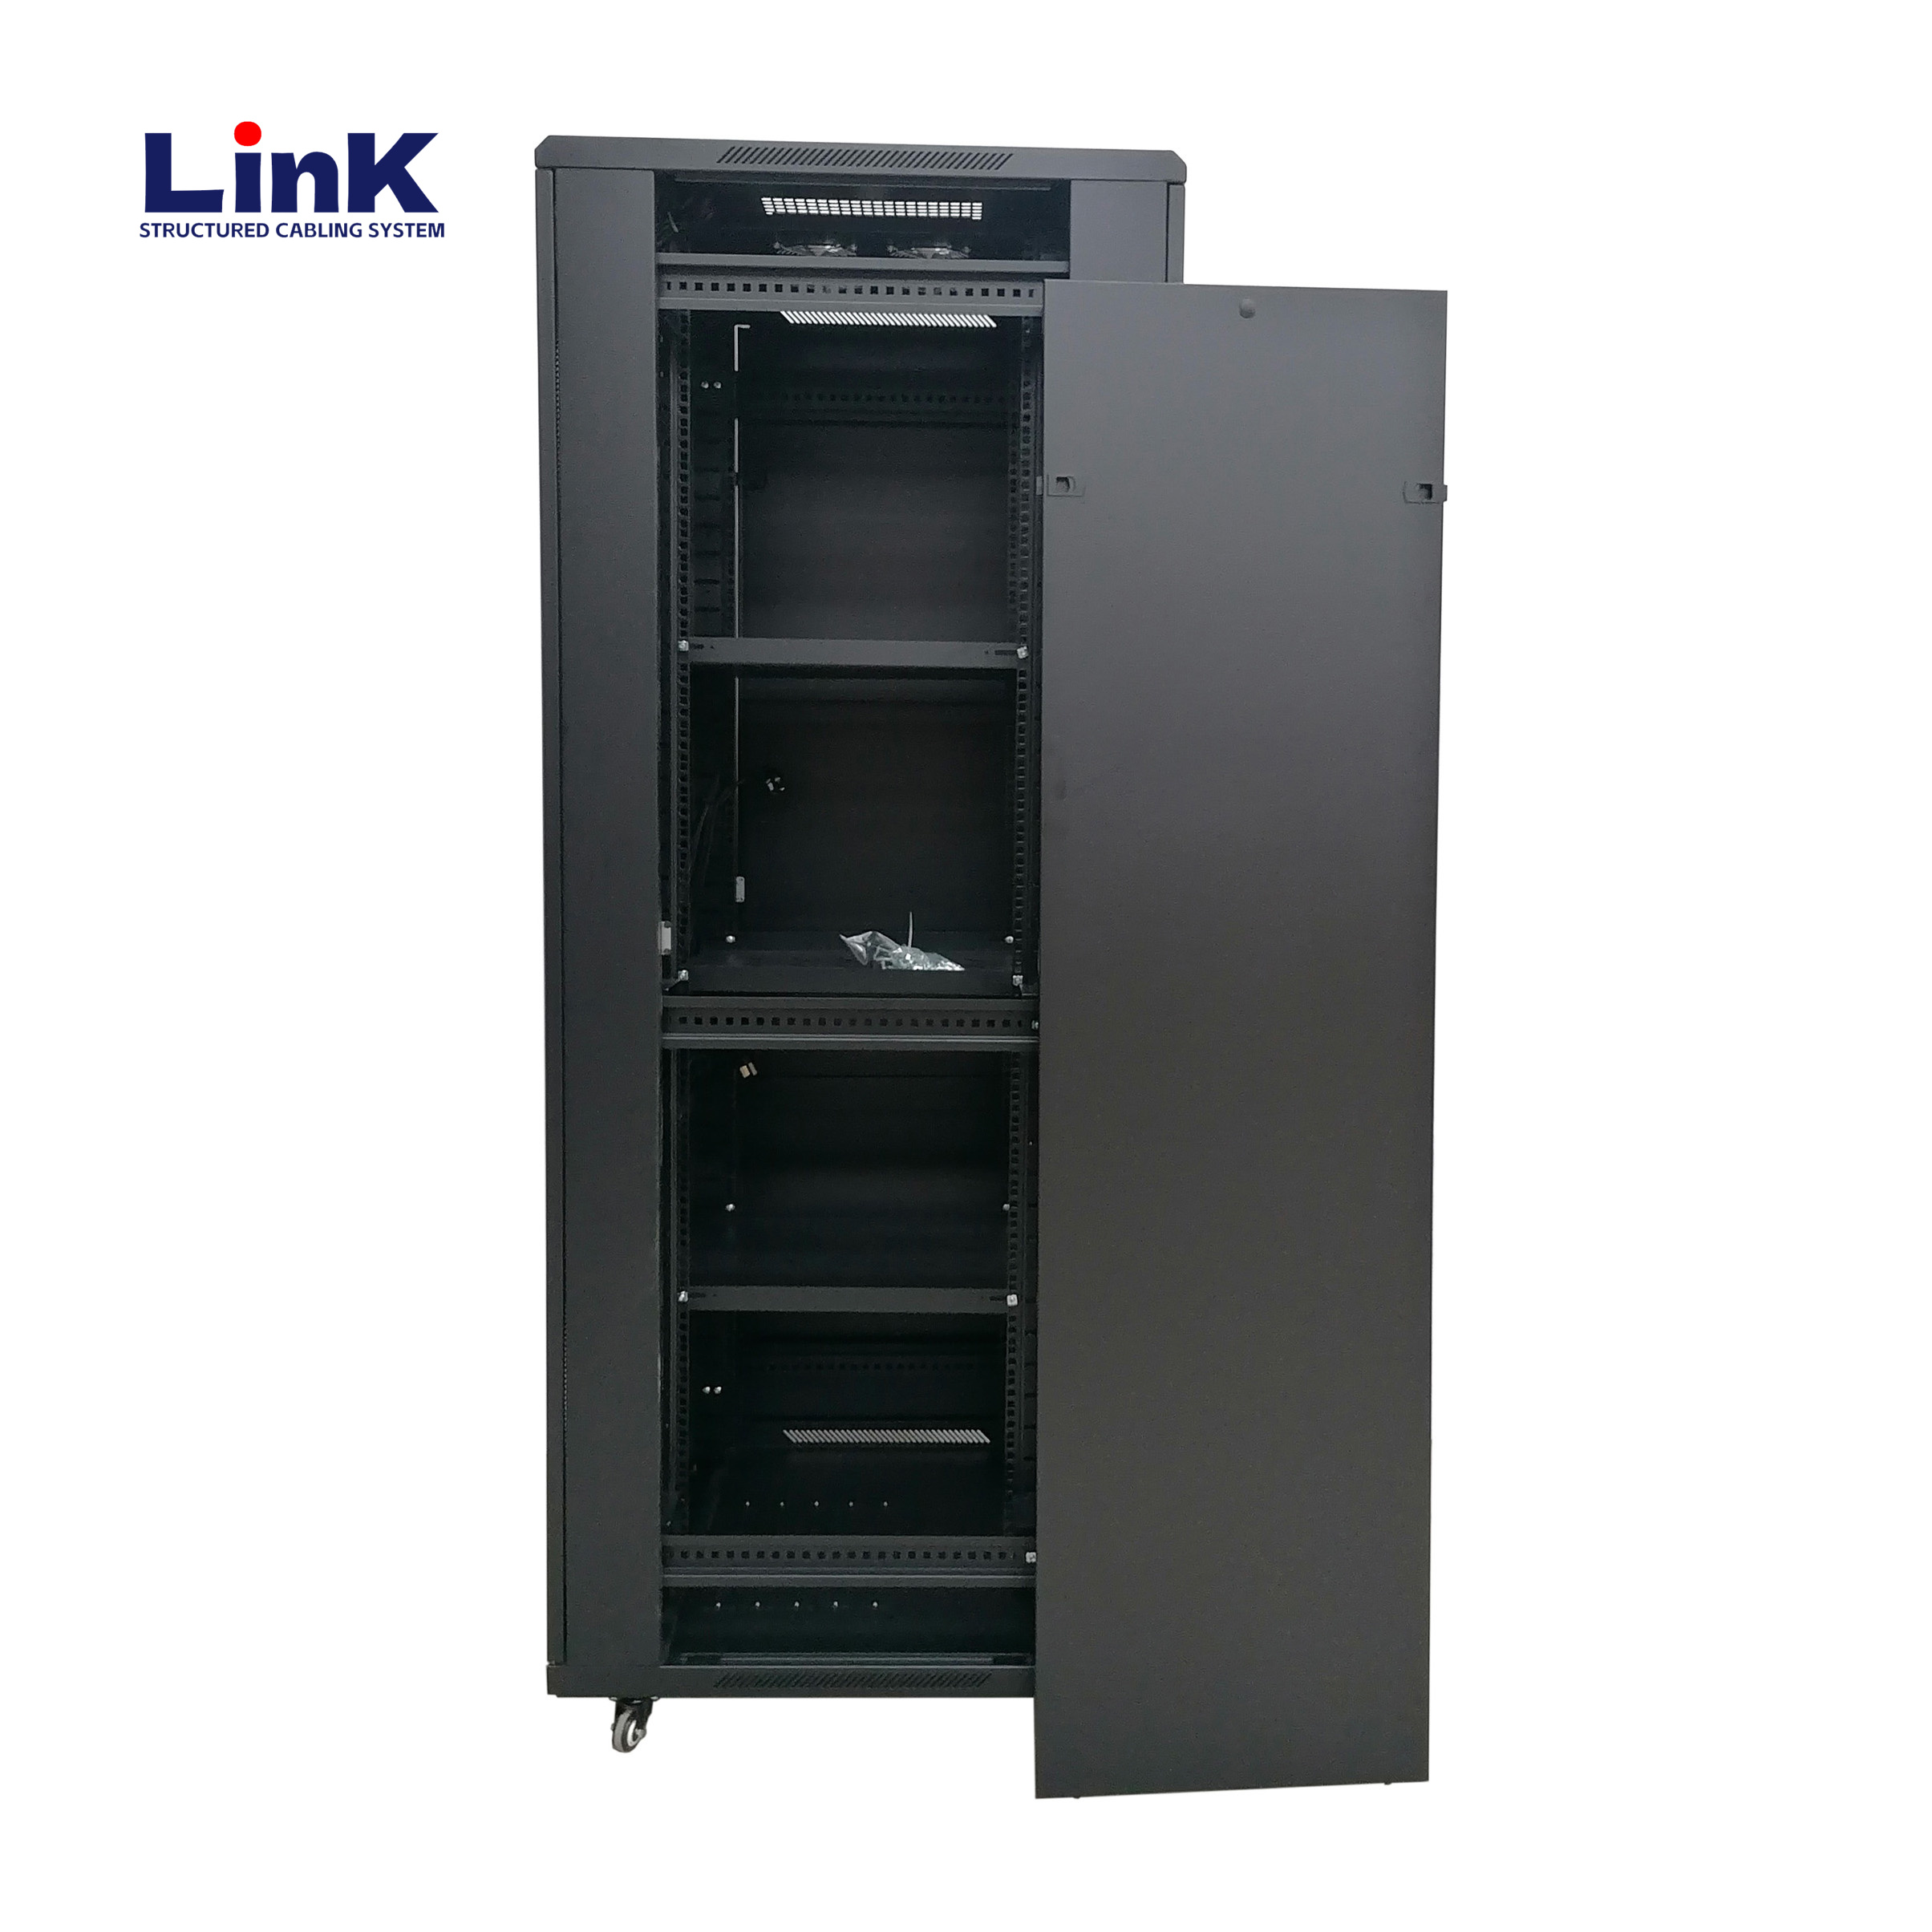 19" Standard Network Cabinet with Tempered Glass Door for Visibility